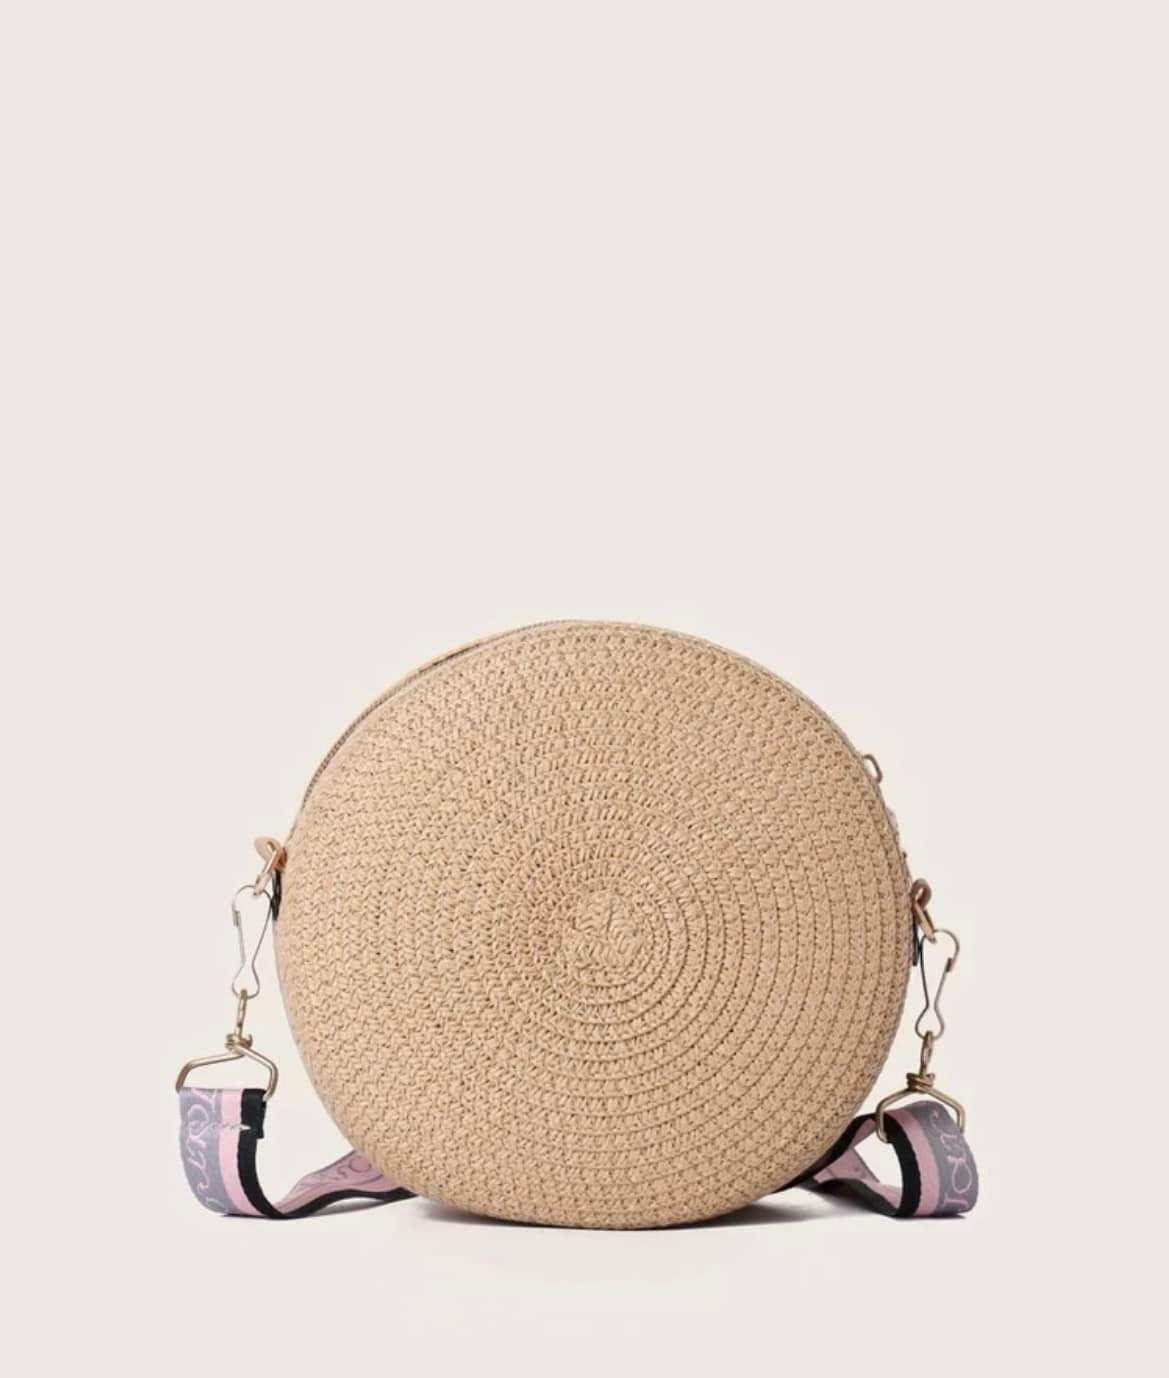 ABACA ROUND SLING BAG BEIGE WITH PINK STRAP